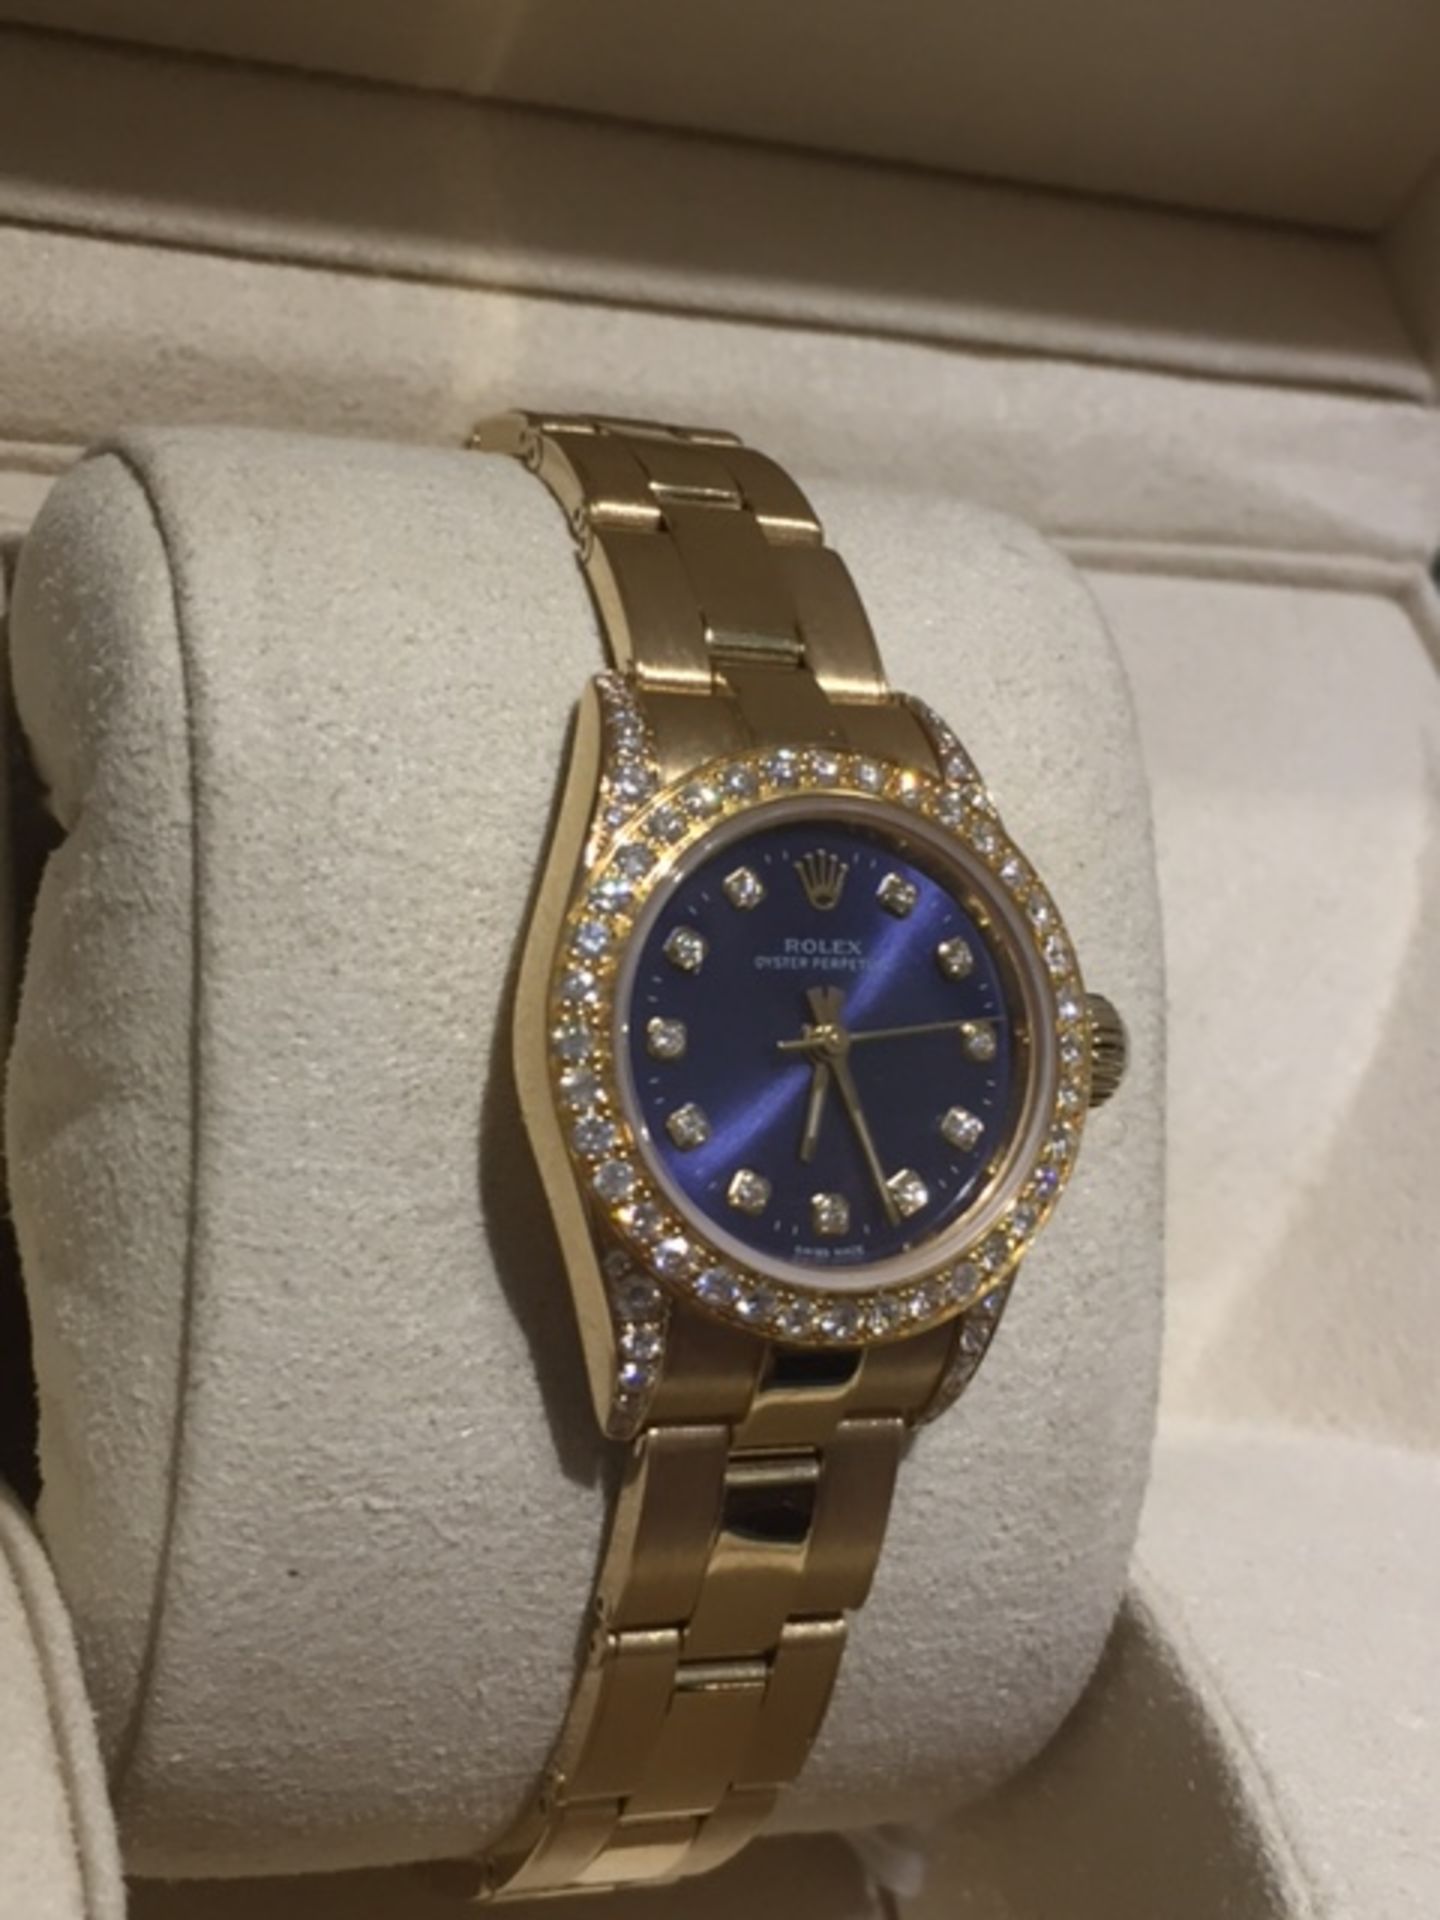 LADIES ROLEX 18ct SOLID GOLD OYSTER PERPETUAL AFTER SET WITH DIAMOND DIAL, DIAMOND BEZEL, DIAMOND - Image 3 of 6